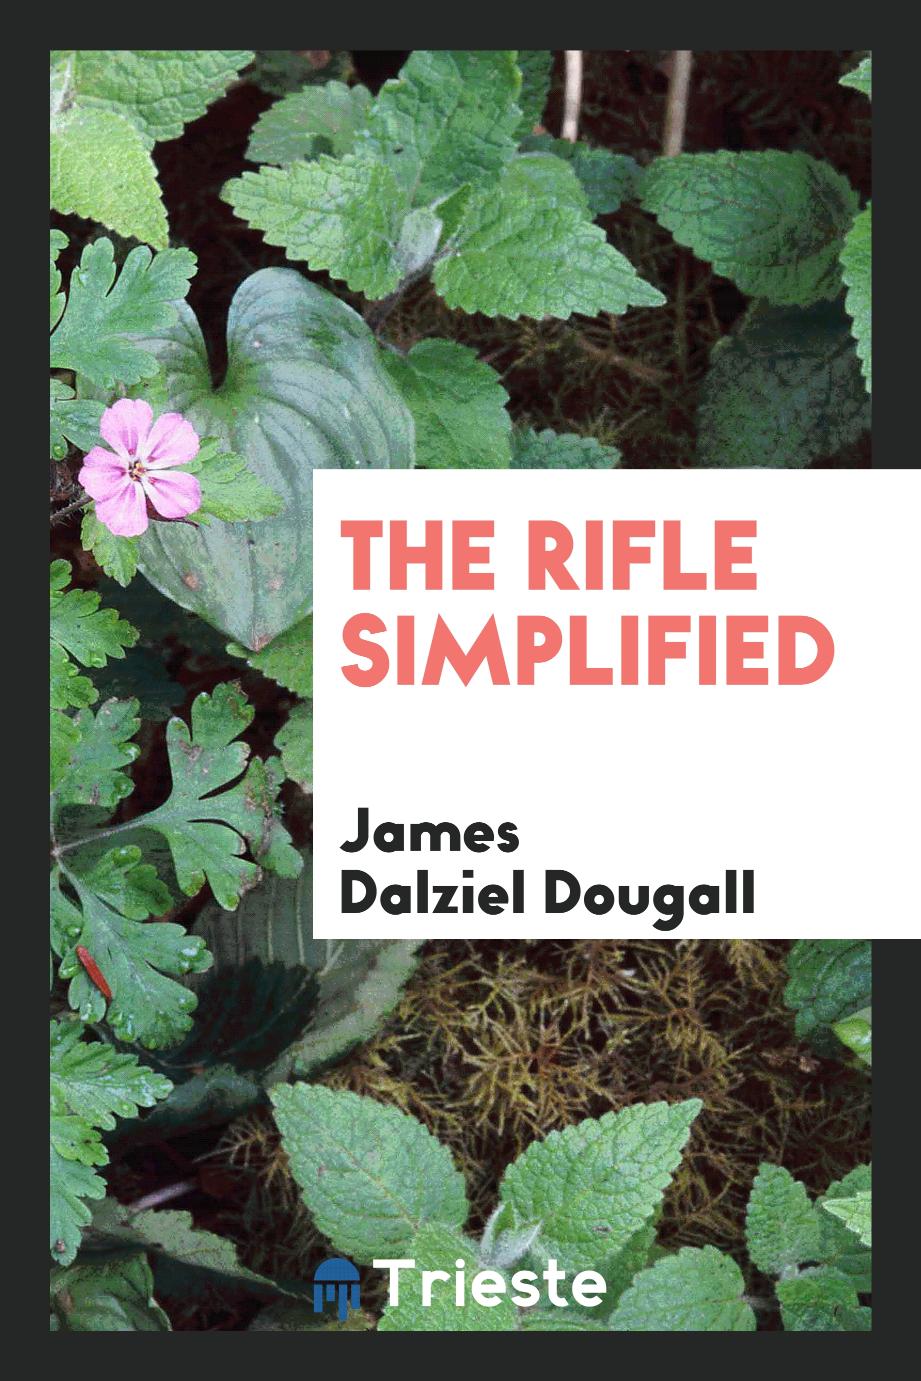 The rifle simplified